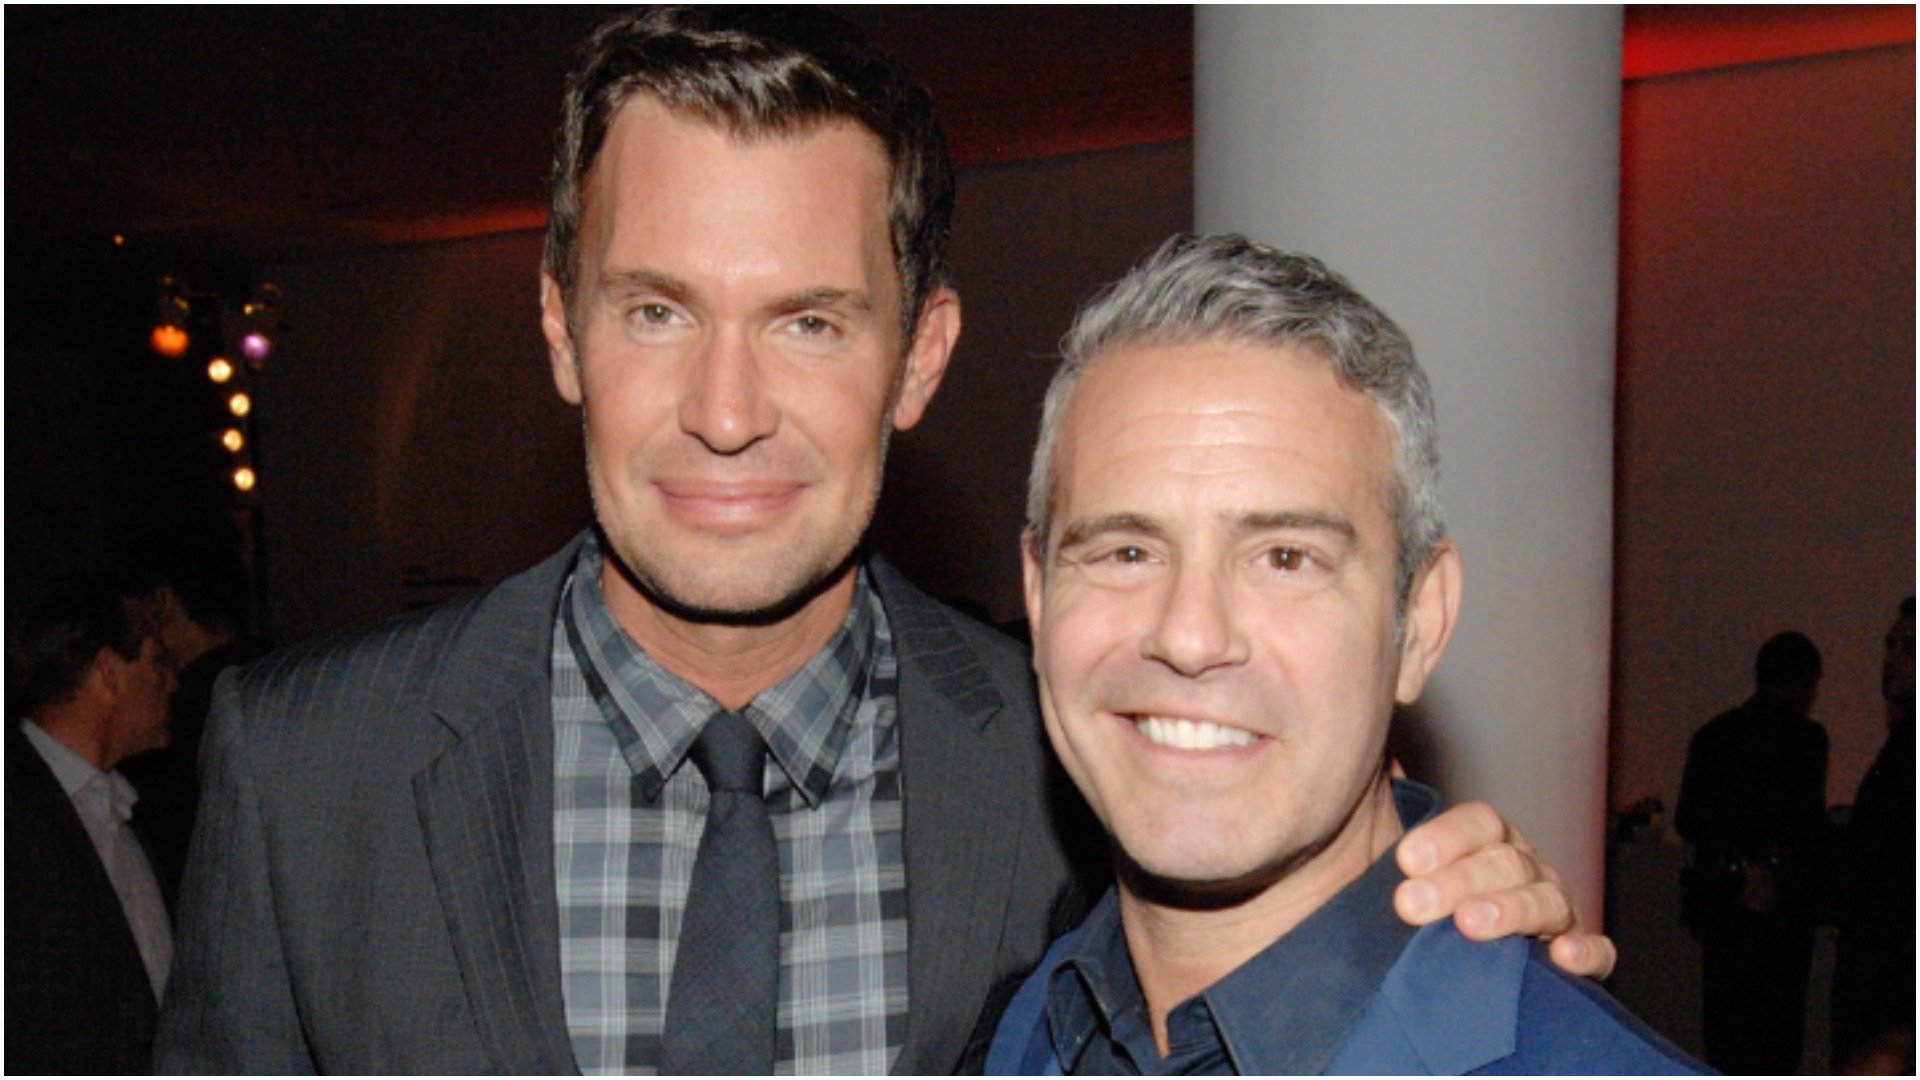 Jeff Lewis and Andy Cohen stop and smile for a photo during an event 